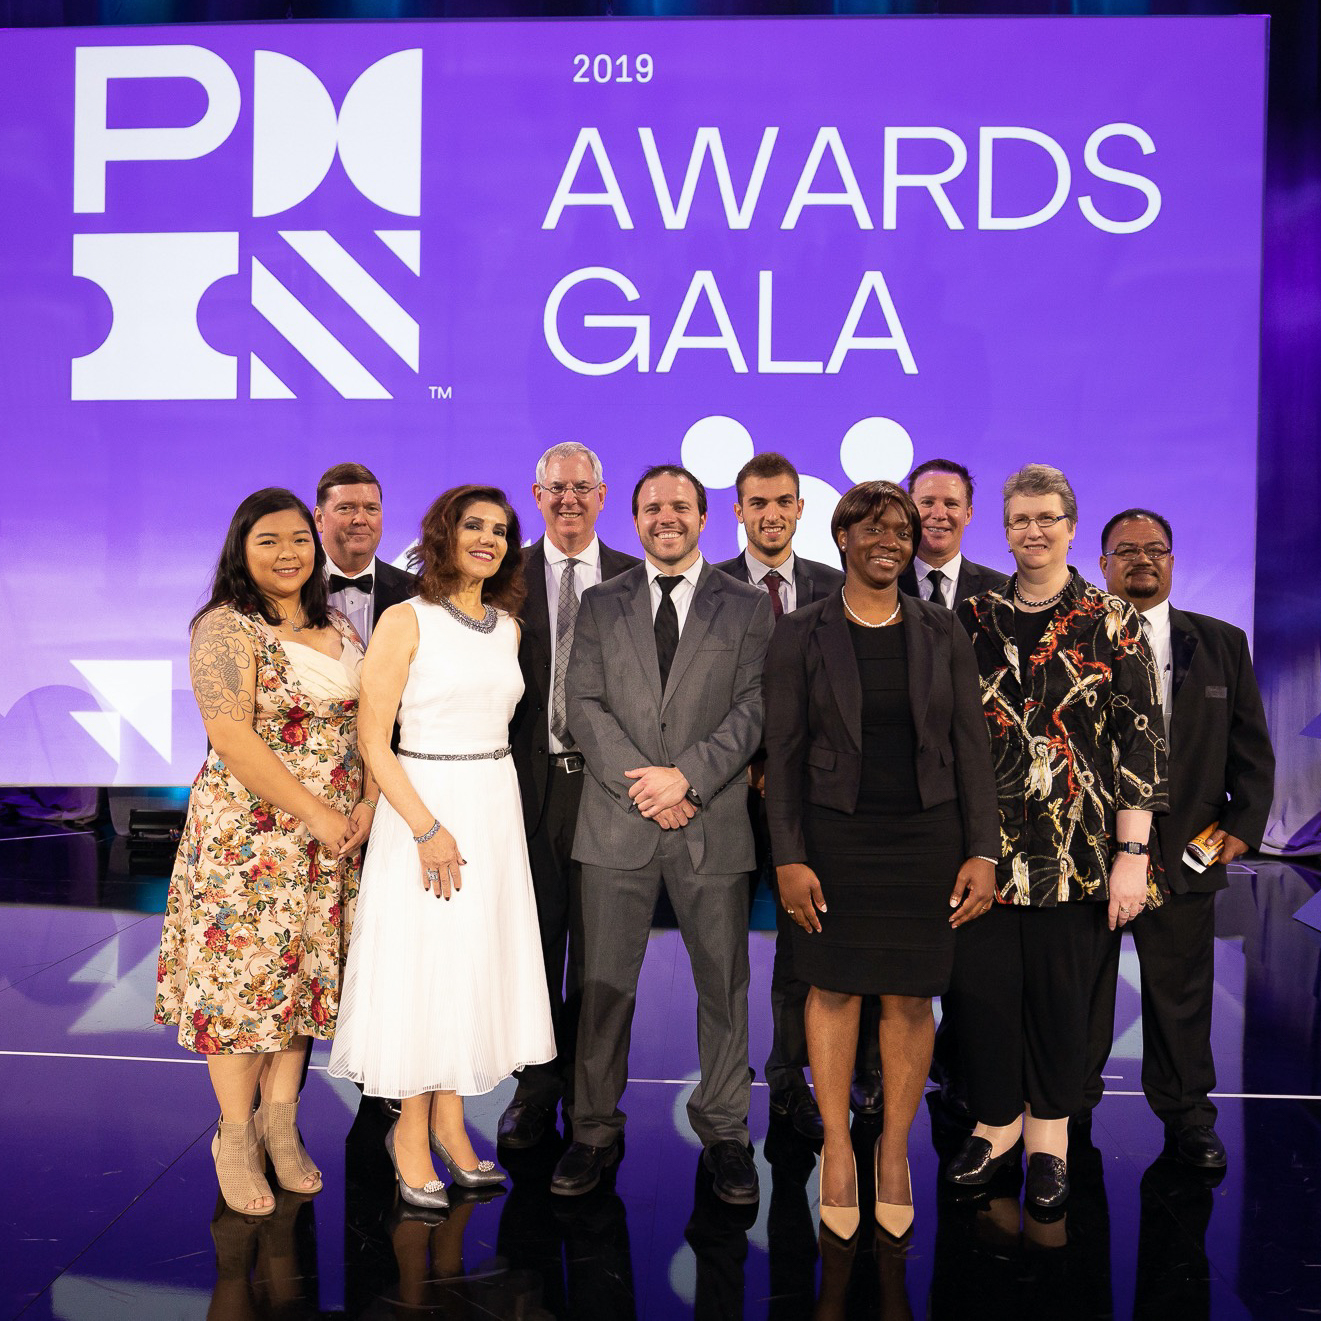 PMI award recipients on stage at gala event